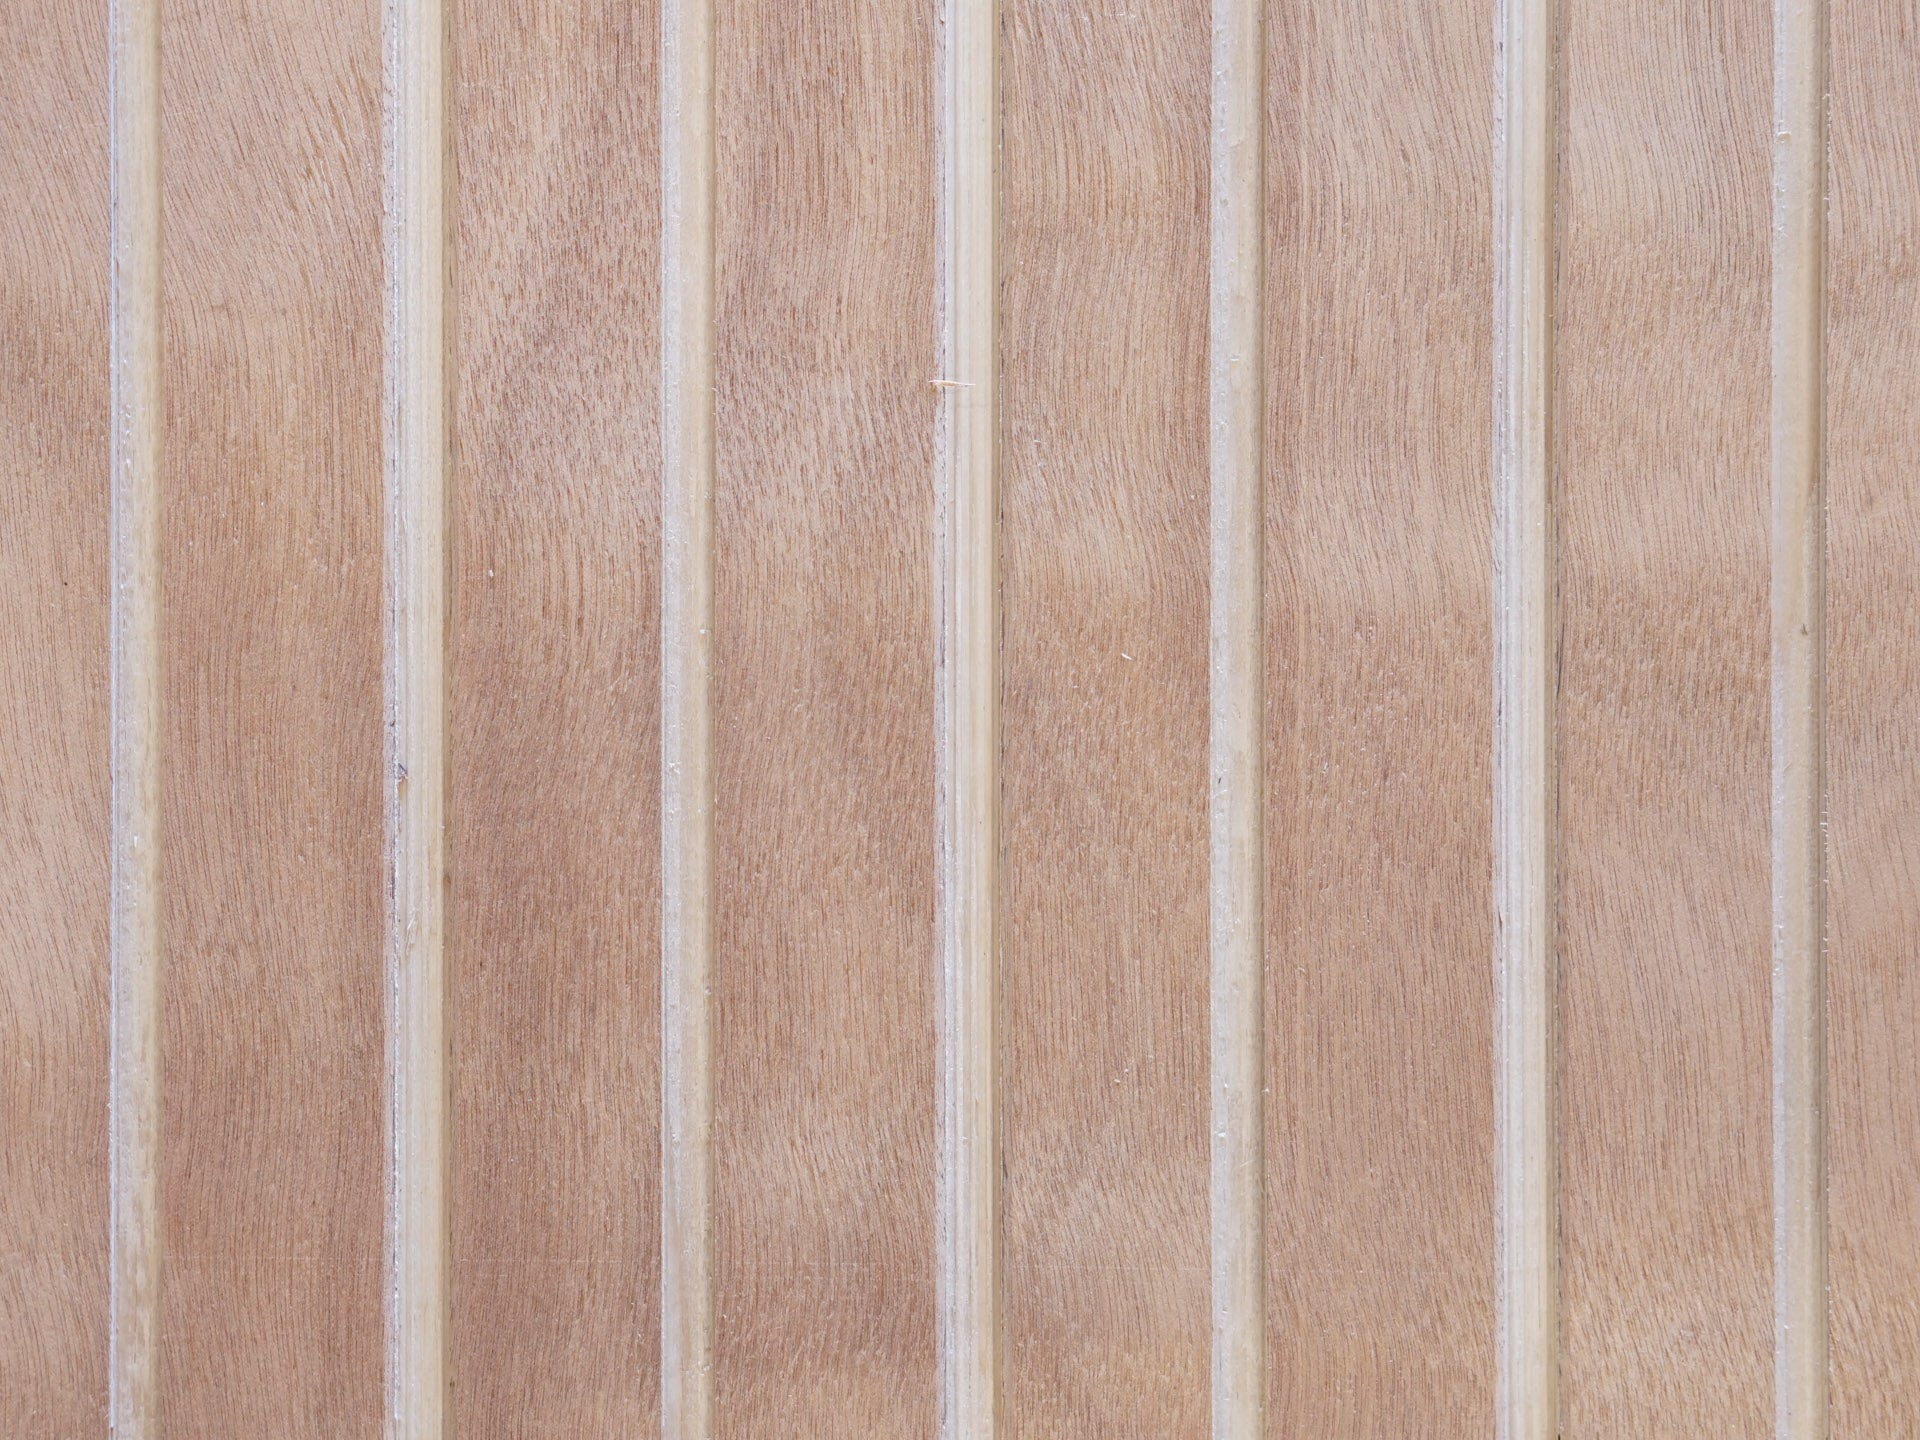 Close up of Vintage Plywood Millworks' Wideline siding showing the wide grooves and wood grain pattern